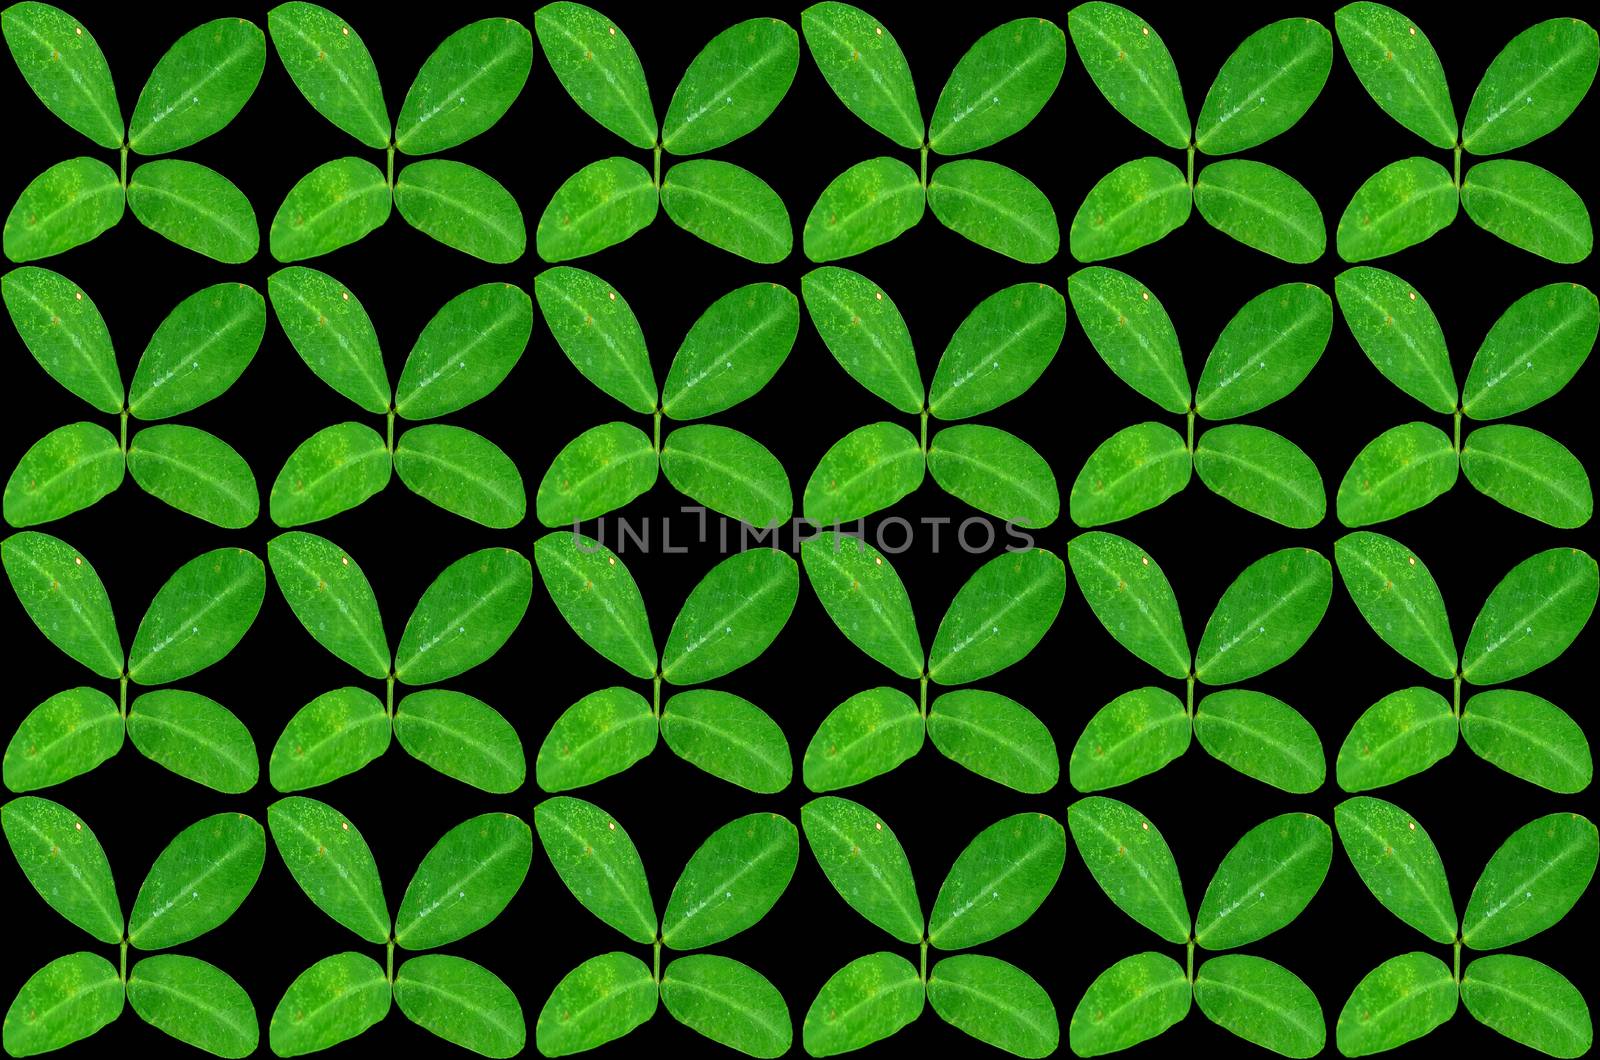 Many green leaves on black background